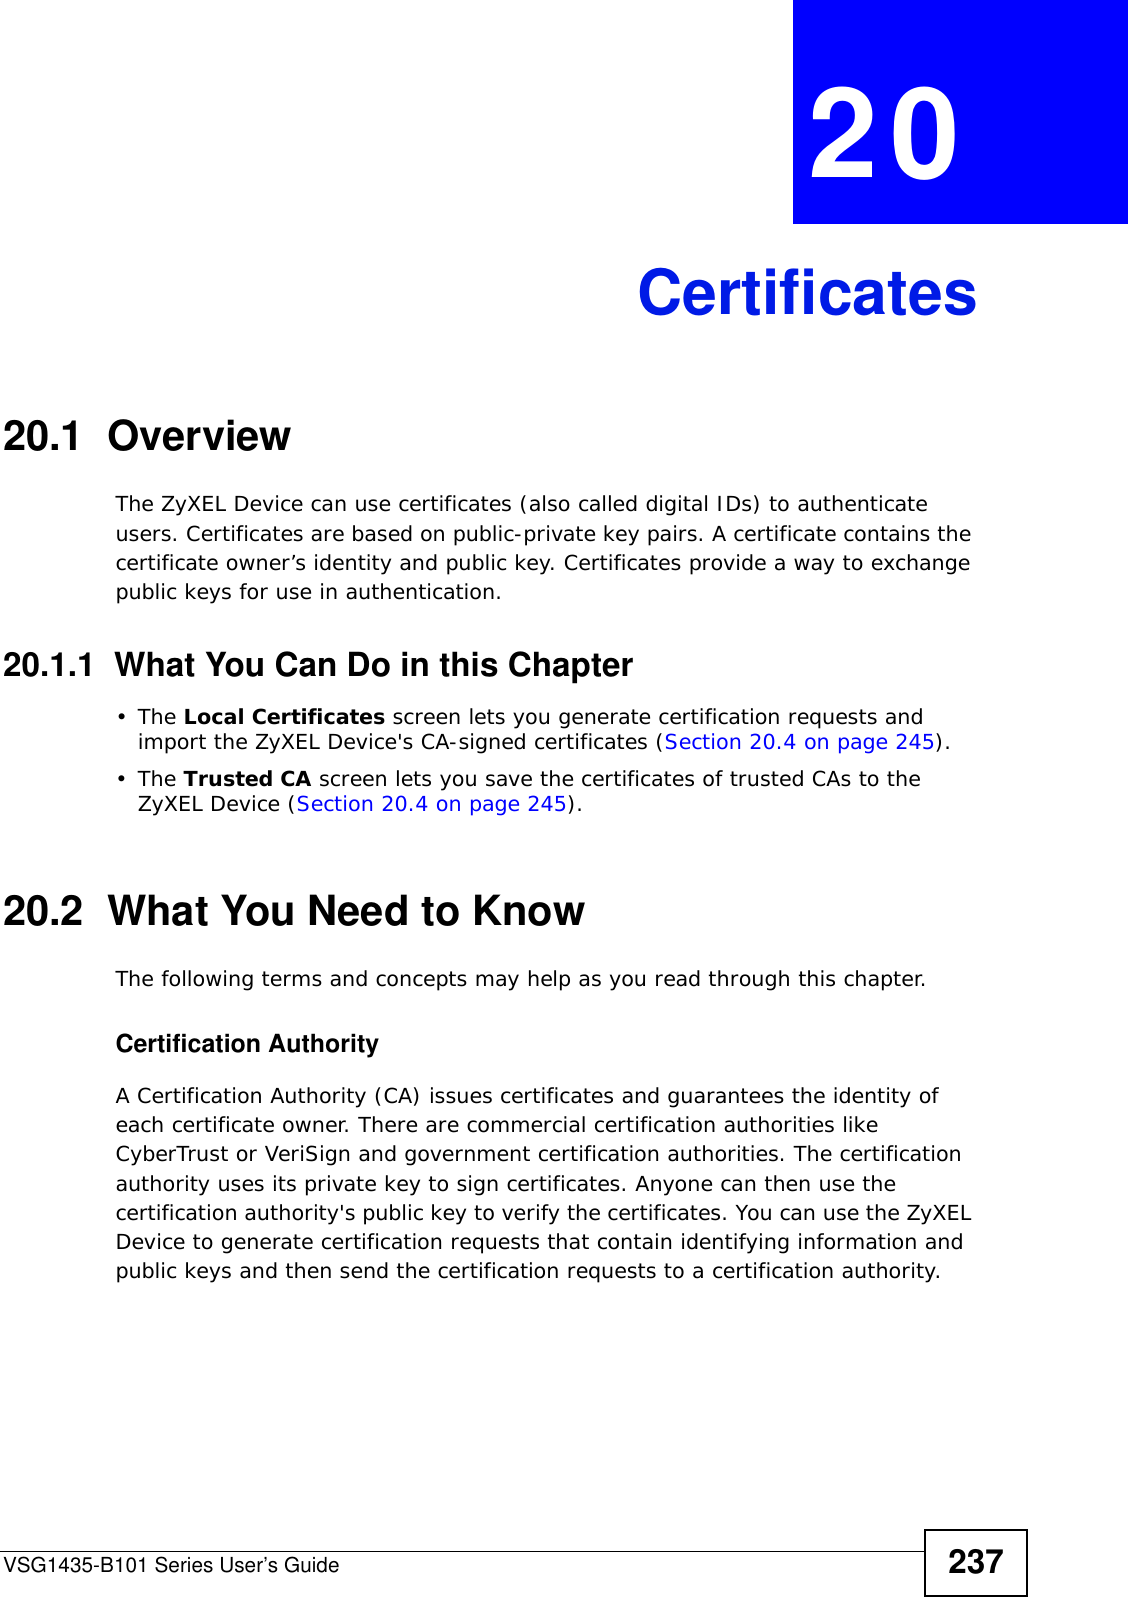 VSG1435-B101 Series User’s Guide 237CHAPTER  20 Certificates20.1  OverviewThe ZyXEL Device can use certificates (also called digital IDs) to authenticate users. Certificates are based on public-private key pairs. A certificate contains the certificate owner’s identity and public key. Certificates provide a way to exchange public keys for use in authentication. 20.1.1  What You Can Do in this Chapter•The Local Certificates screen lets you generate certification requests and import the ZyXEL Device&apos;s CA-signed certificates (Section 20.4 on page 245).•The Trusted CA screen lets you save the certificates of trusted CAs to the ZyXEL Device (Section 20.4 on page 245).20.2  What You Need to KnowThe following terms and concepts may help as you read through this chapter.Certification Authority A Certification Authority (CA) issues certificates and guarantees the identity of each certificate owner. There are commercial certification authorities like CyberTrust or VeriSign and government certification authorities. The certification authority uses its private key to sign certificates. Anyone can then use the certification authority&apos;s public key to verify the certificates. You can use the ZyXEL Device to generate certification requests that contain identifying information and public keys and then send the certification requests to a certification authority.